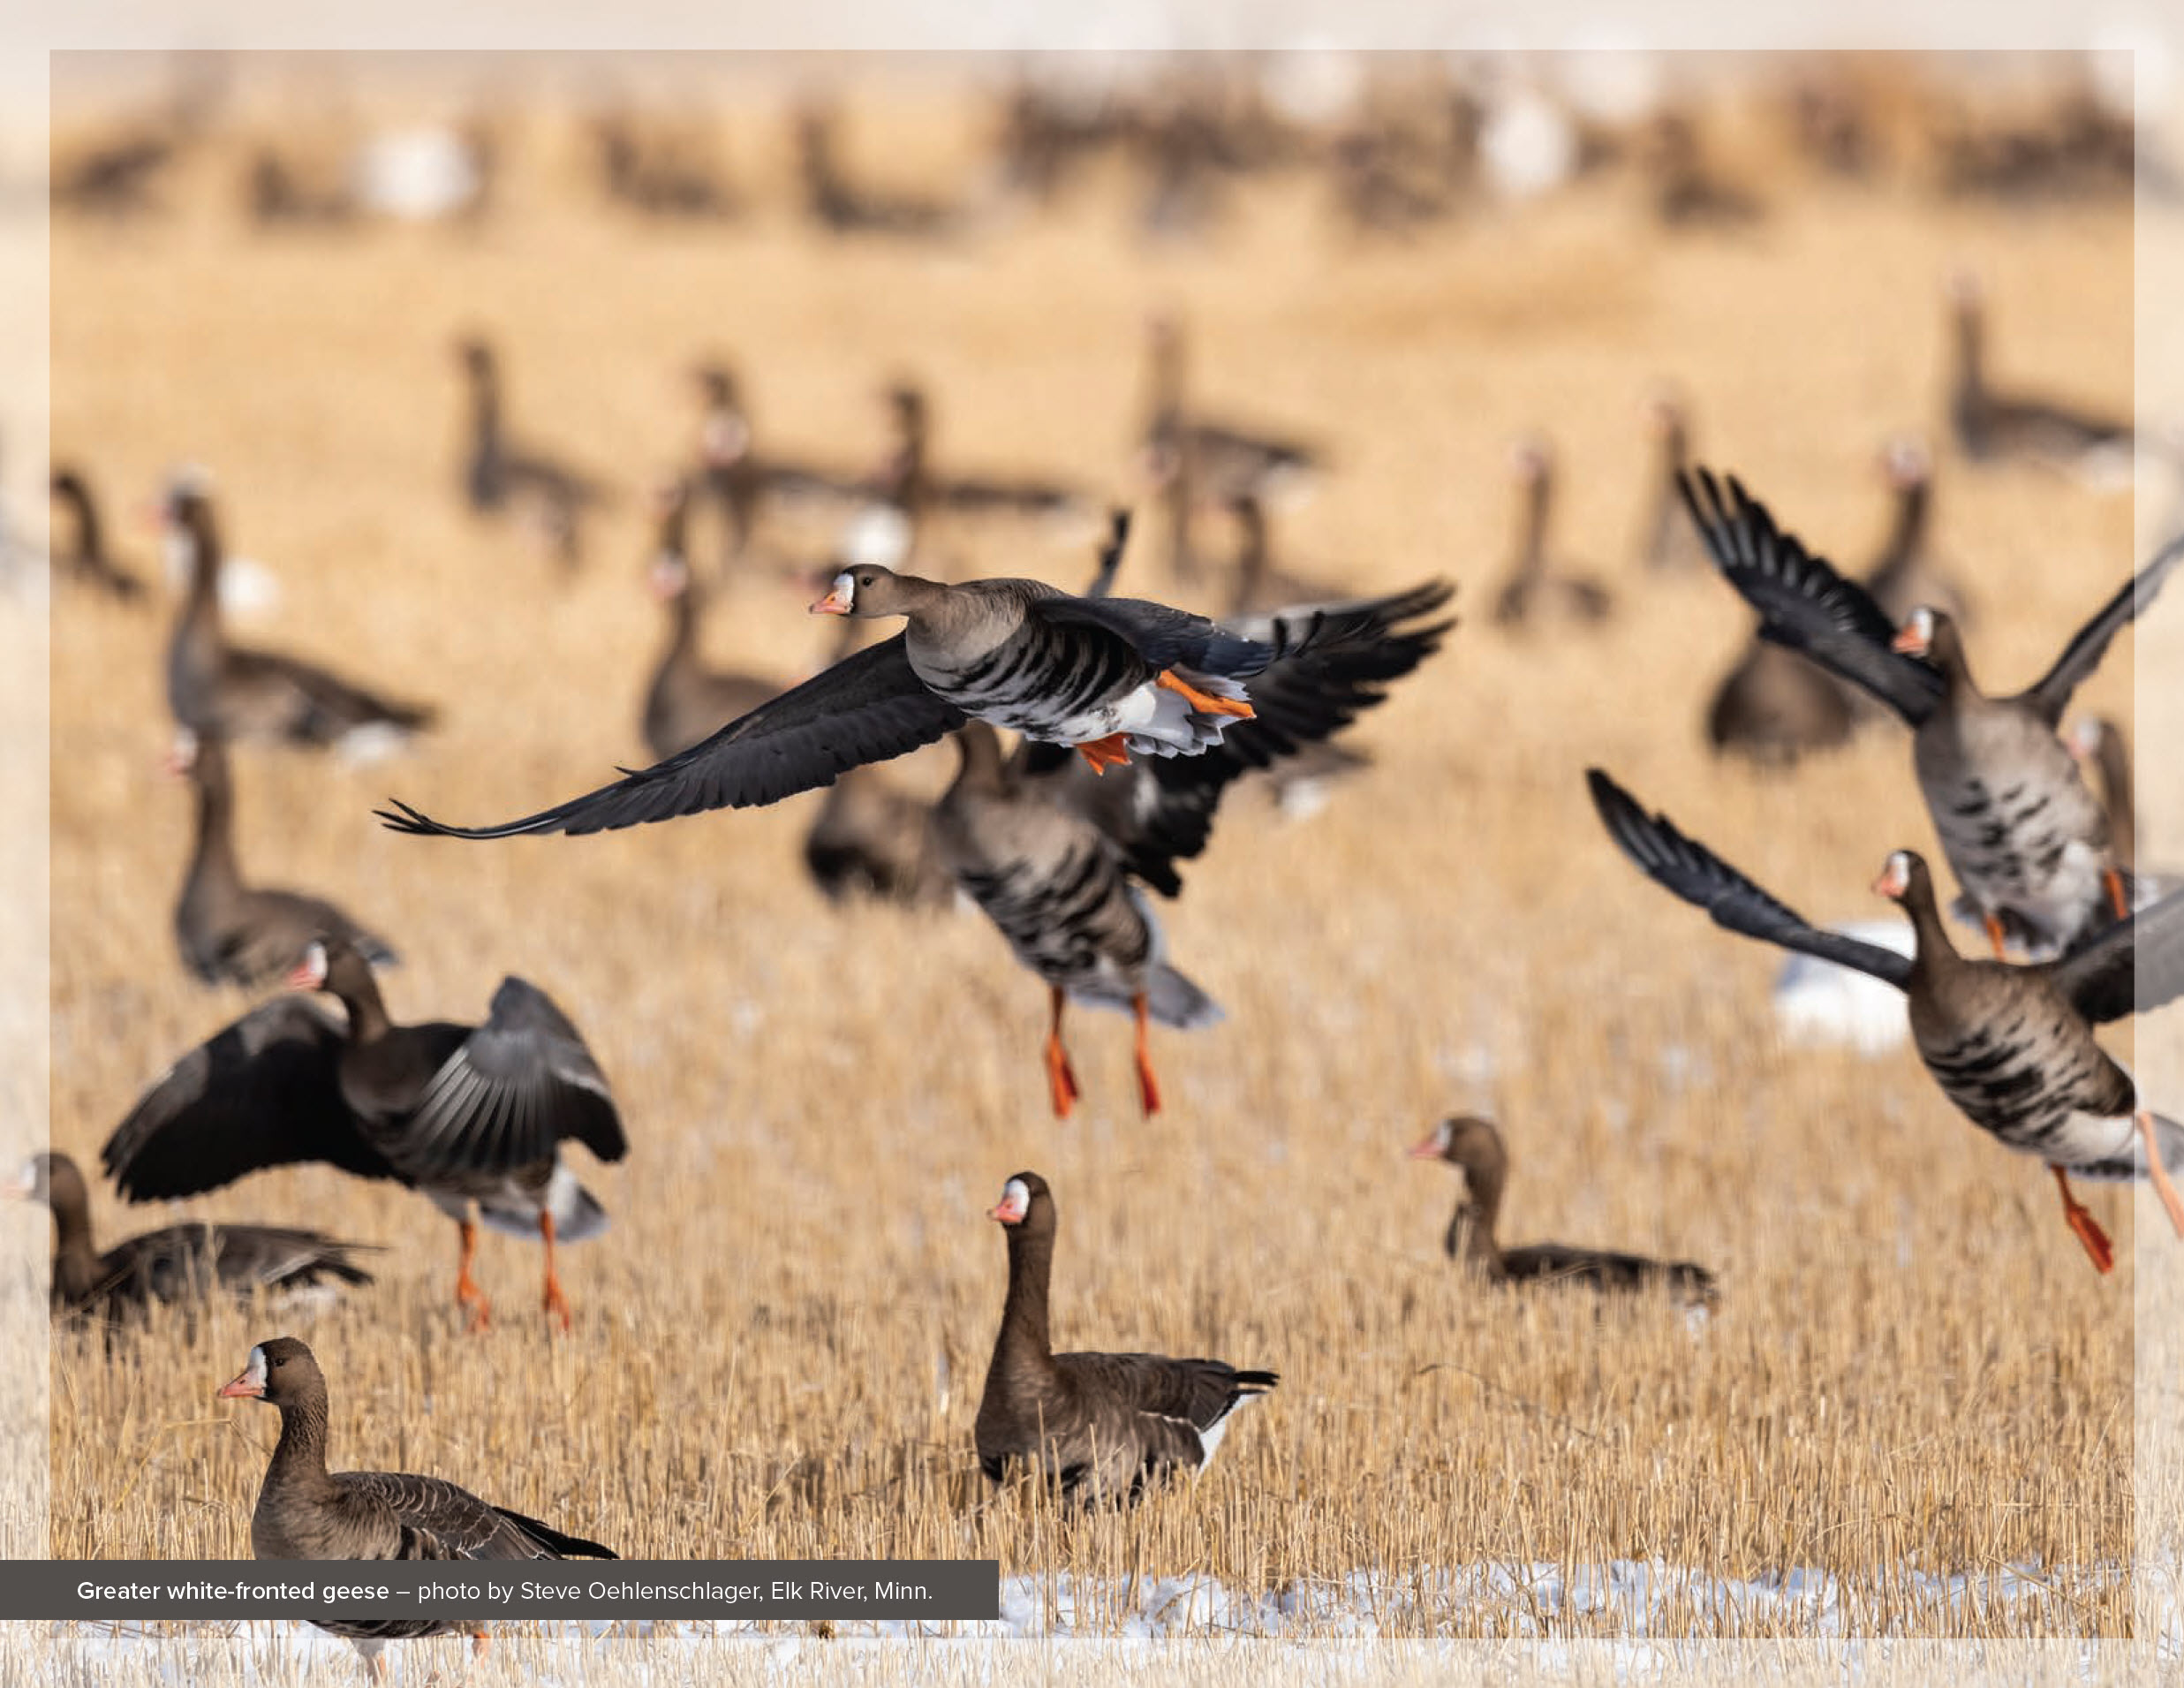 Greater white-fronted geese – photo by Steve Oehlenschlager, Elk River, Minn.